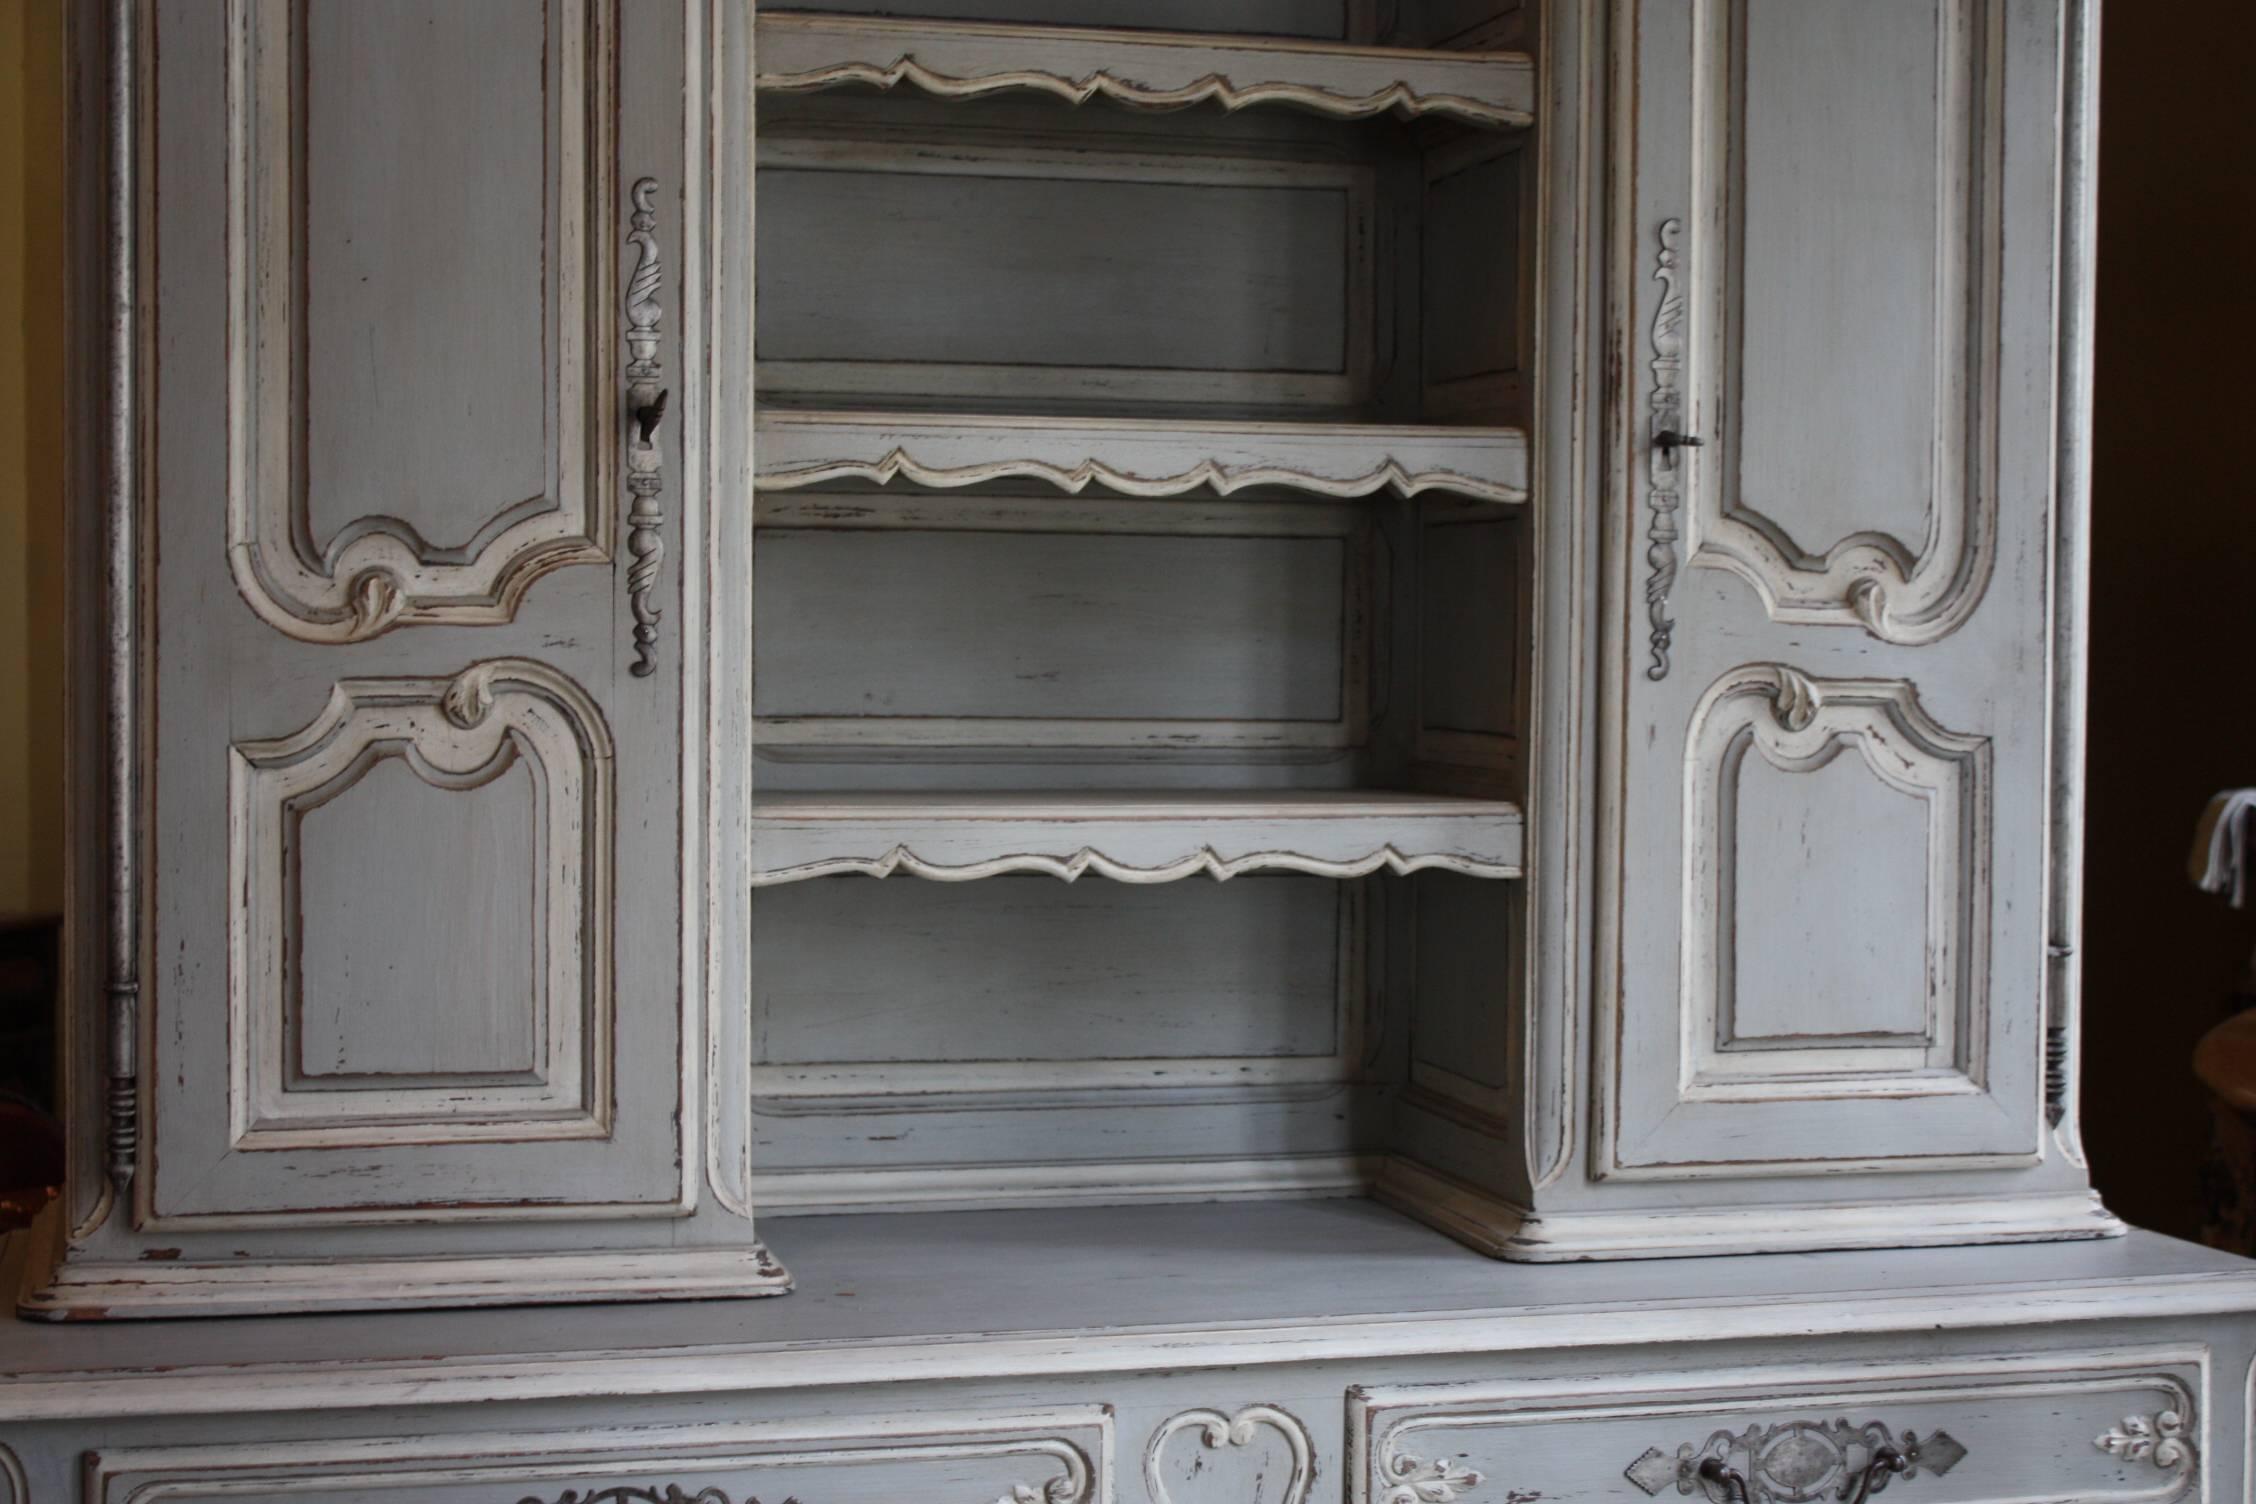 Beautiful vaisselier from the north of Normandy painted French blue/grey and white. This vaisselier has two plate racks. The space between the two shelves is 9 inches high and can hold 9